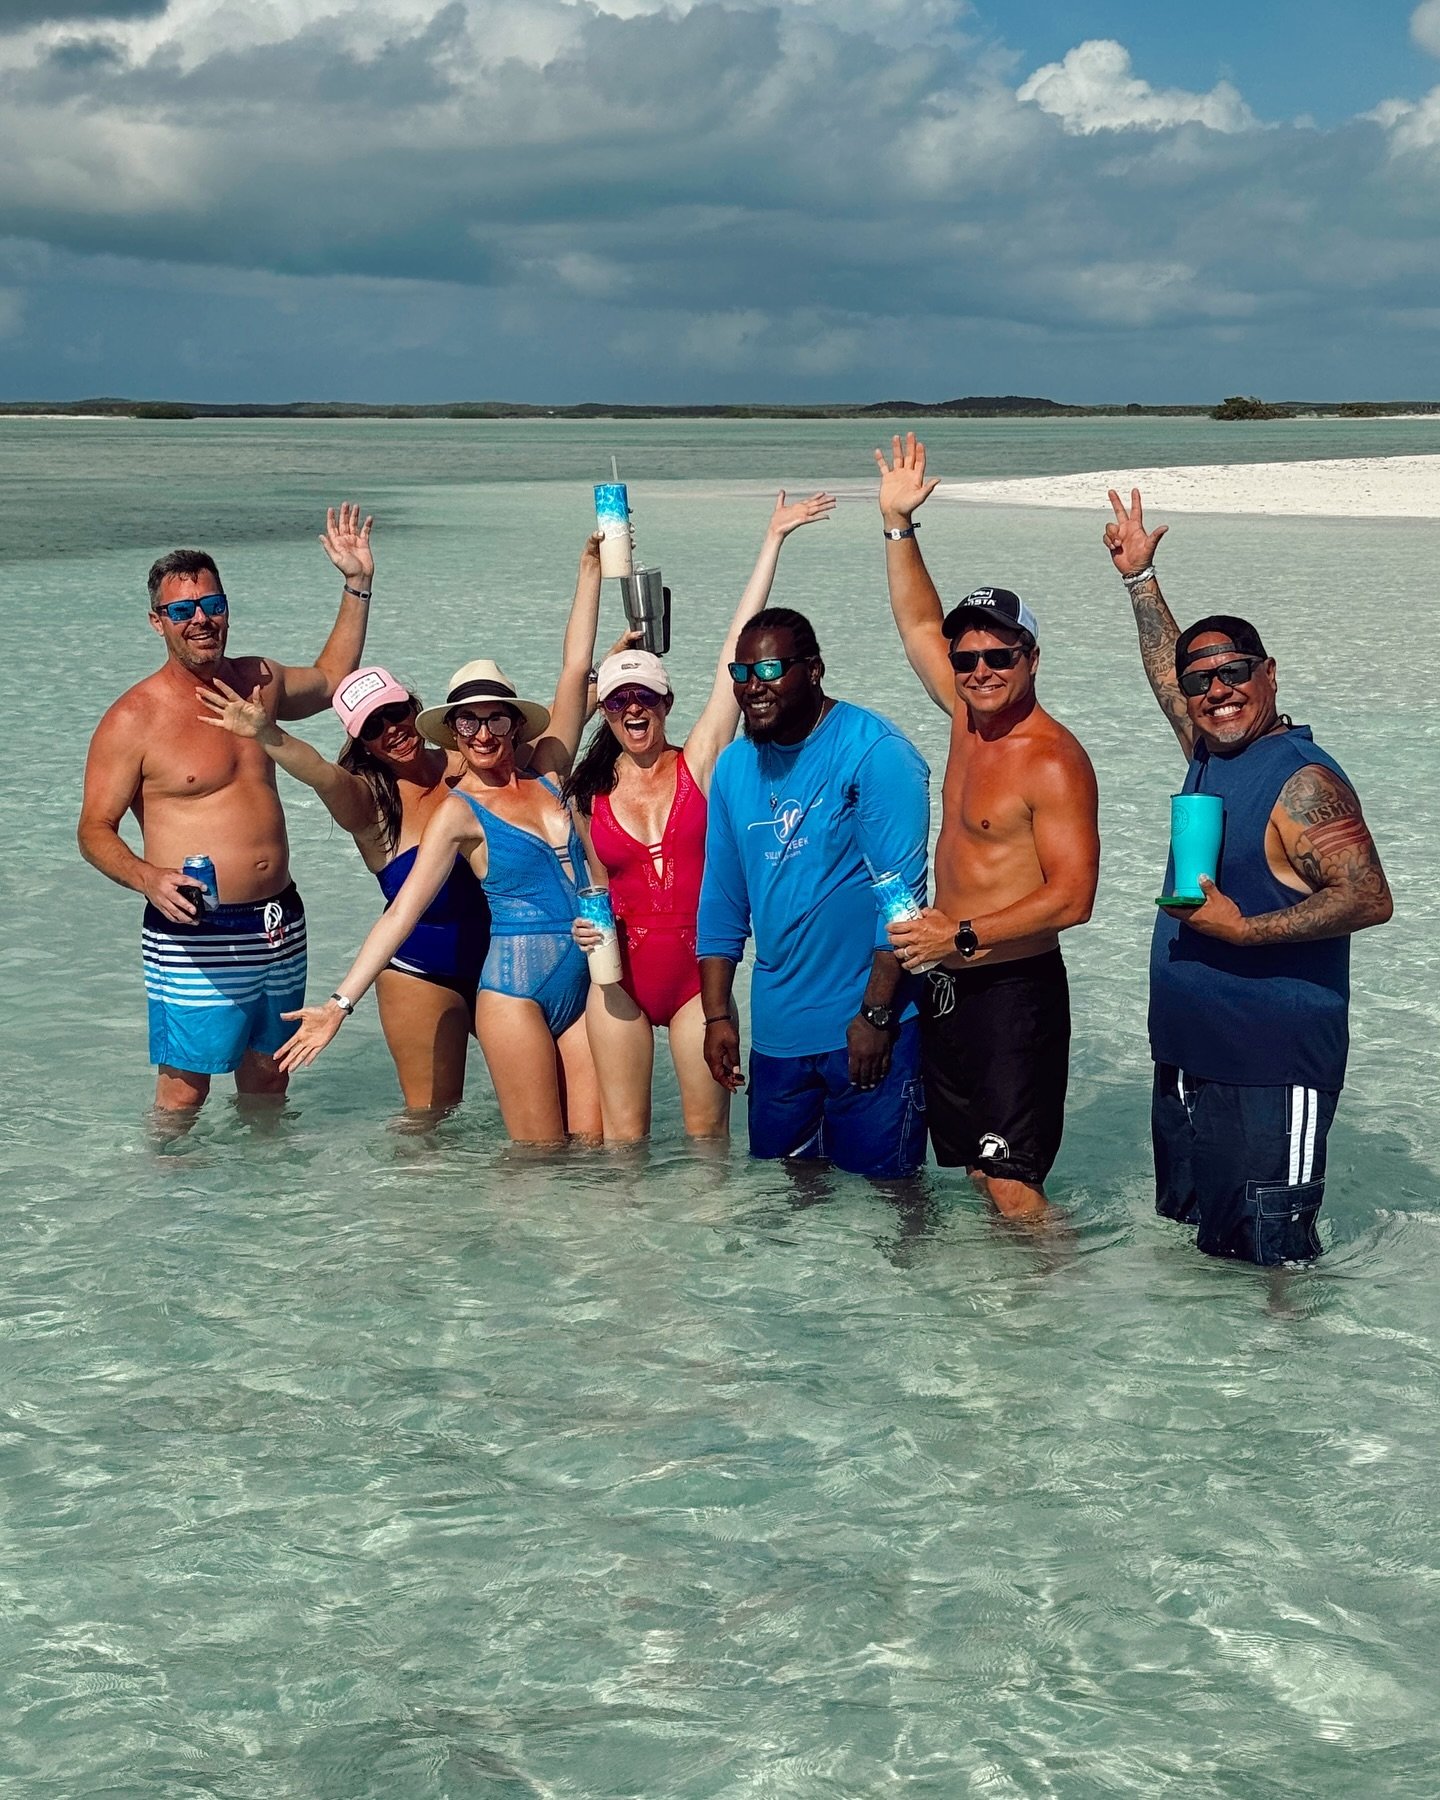 Raise your hand if Turks and Caicos is your favorite place on earth! 🌍 

#turksandcaicos #sillycreekwatersports #providenciales #islandvacation #tropicalvacation #tropicalgetaway